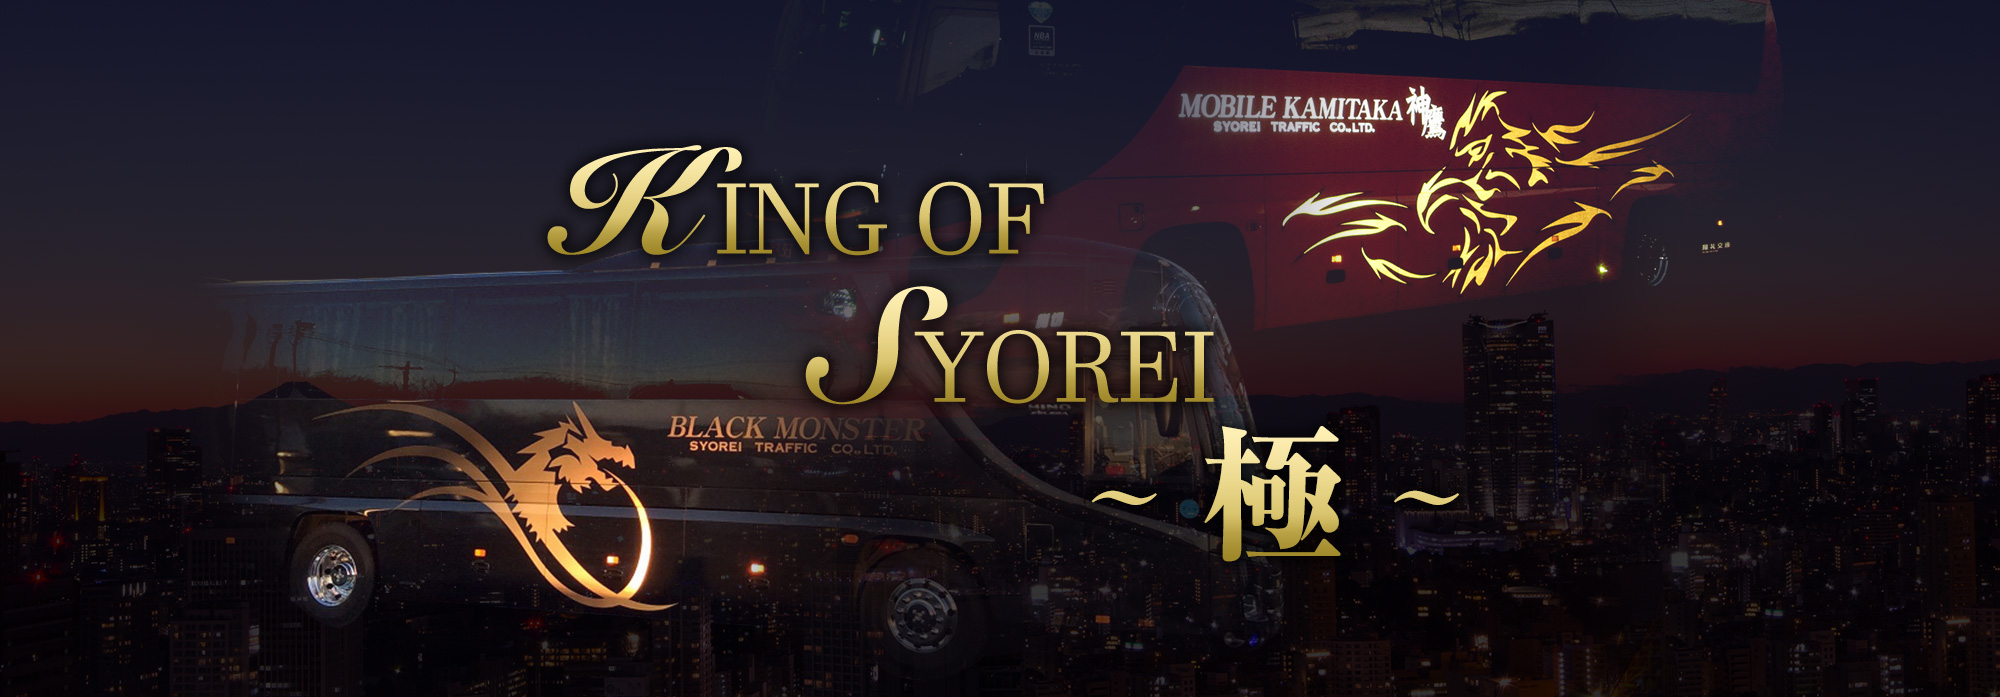 KING OF SYOREI ～匠～